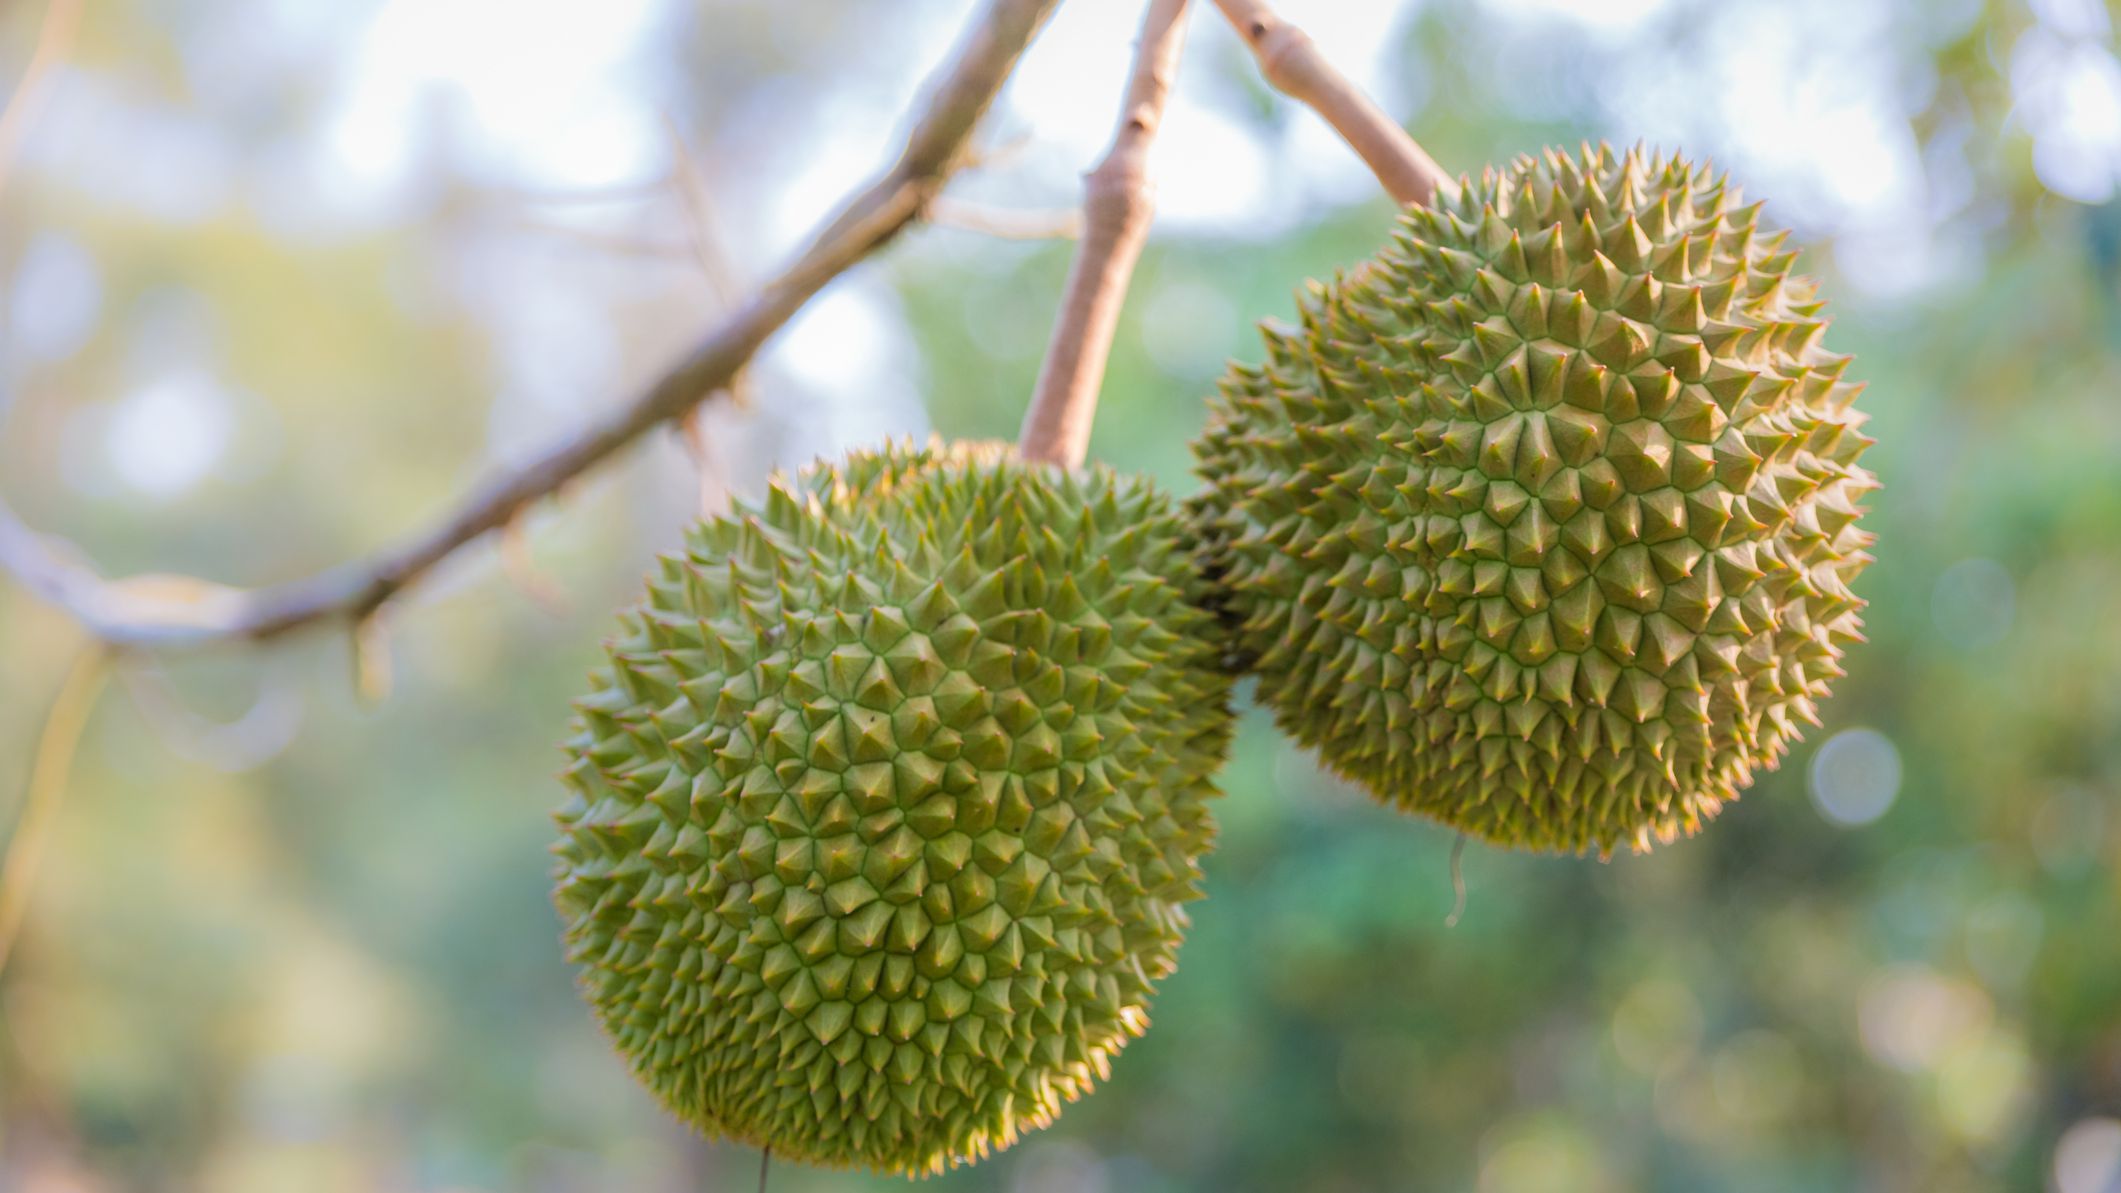 Want to know about the musang king durian fruit